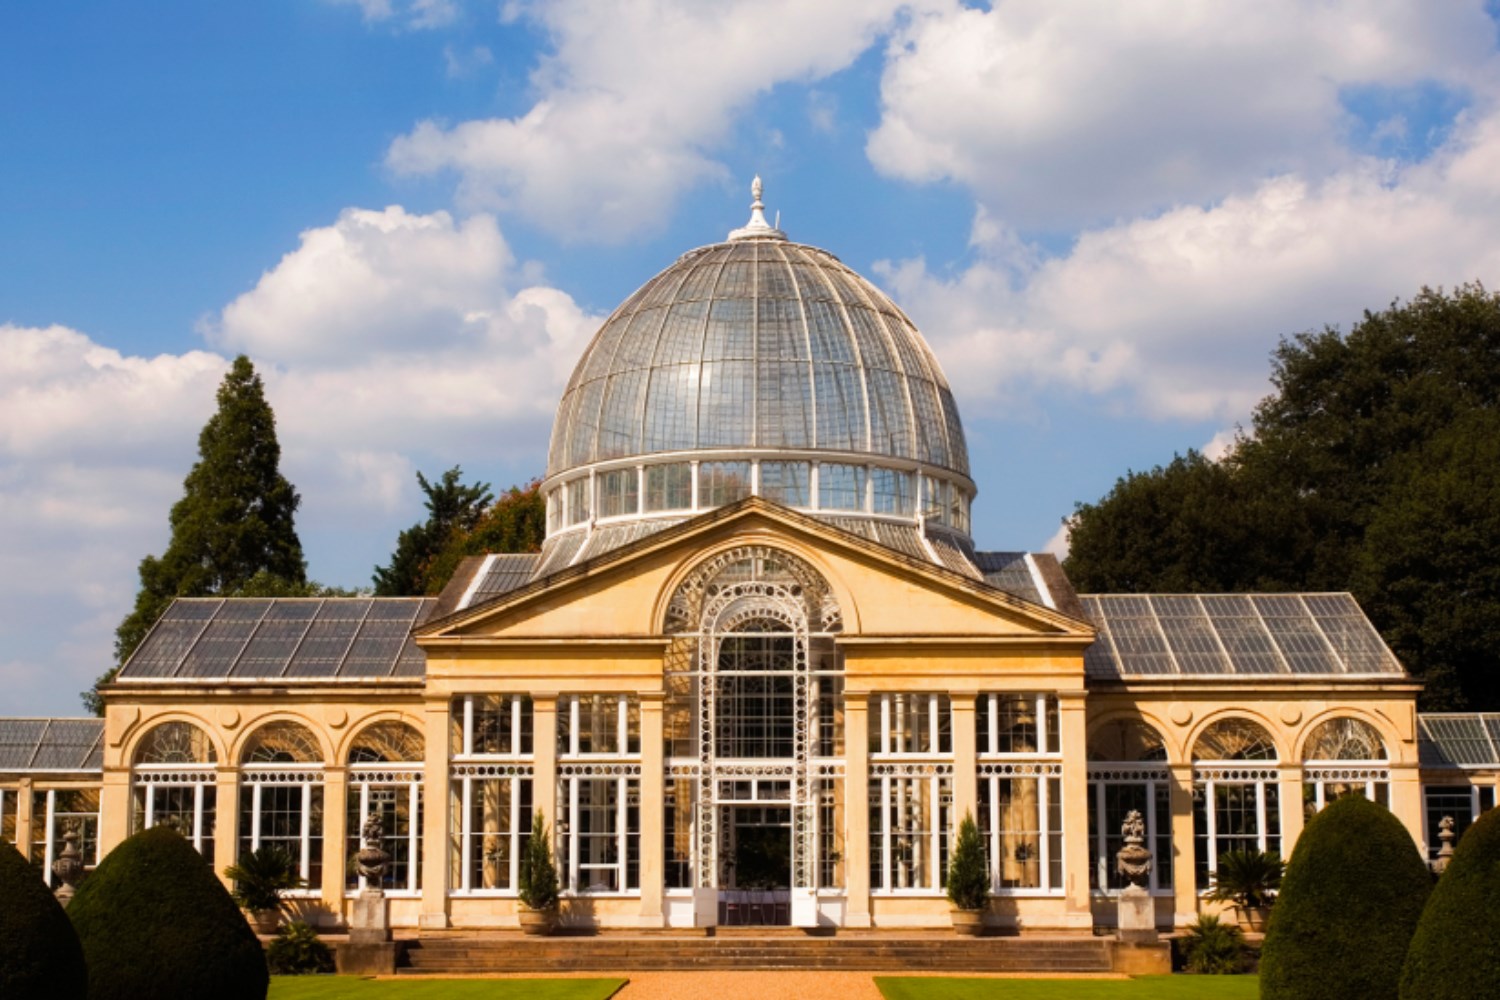 Syon Park Conservatory a filming location for scenes in bridgerton